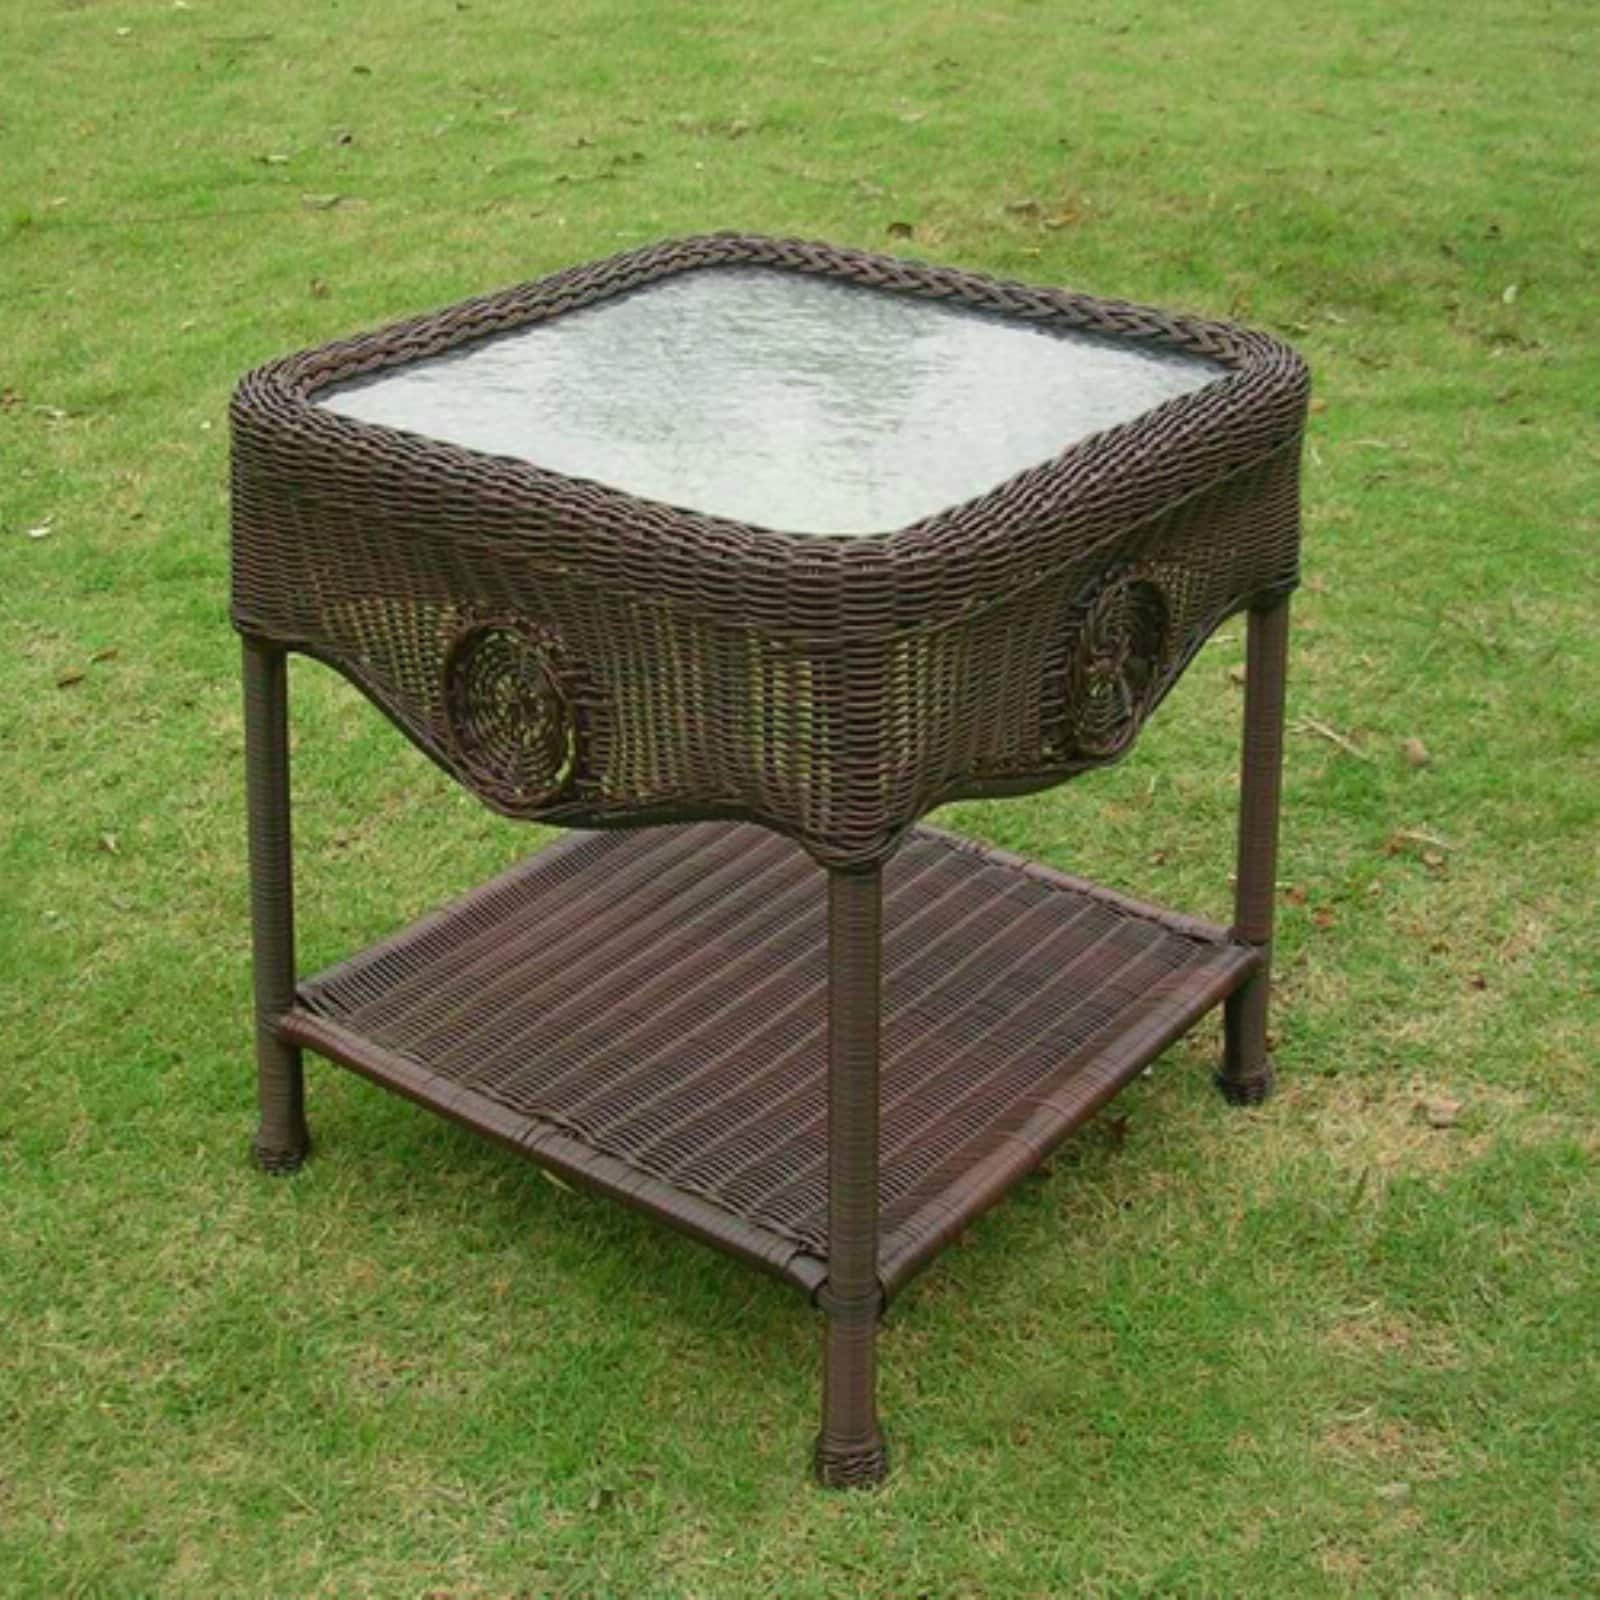 International Caravan Madison Wicker Resin Aluminum Patio Side Table with Glass - image 4 of 7